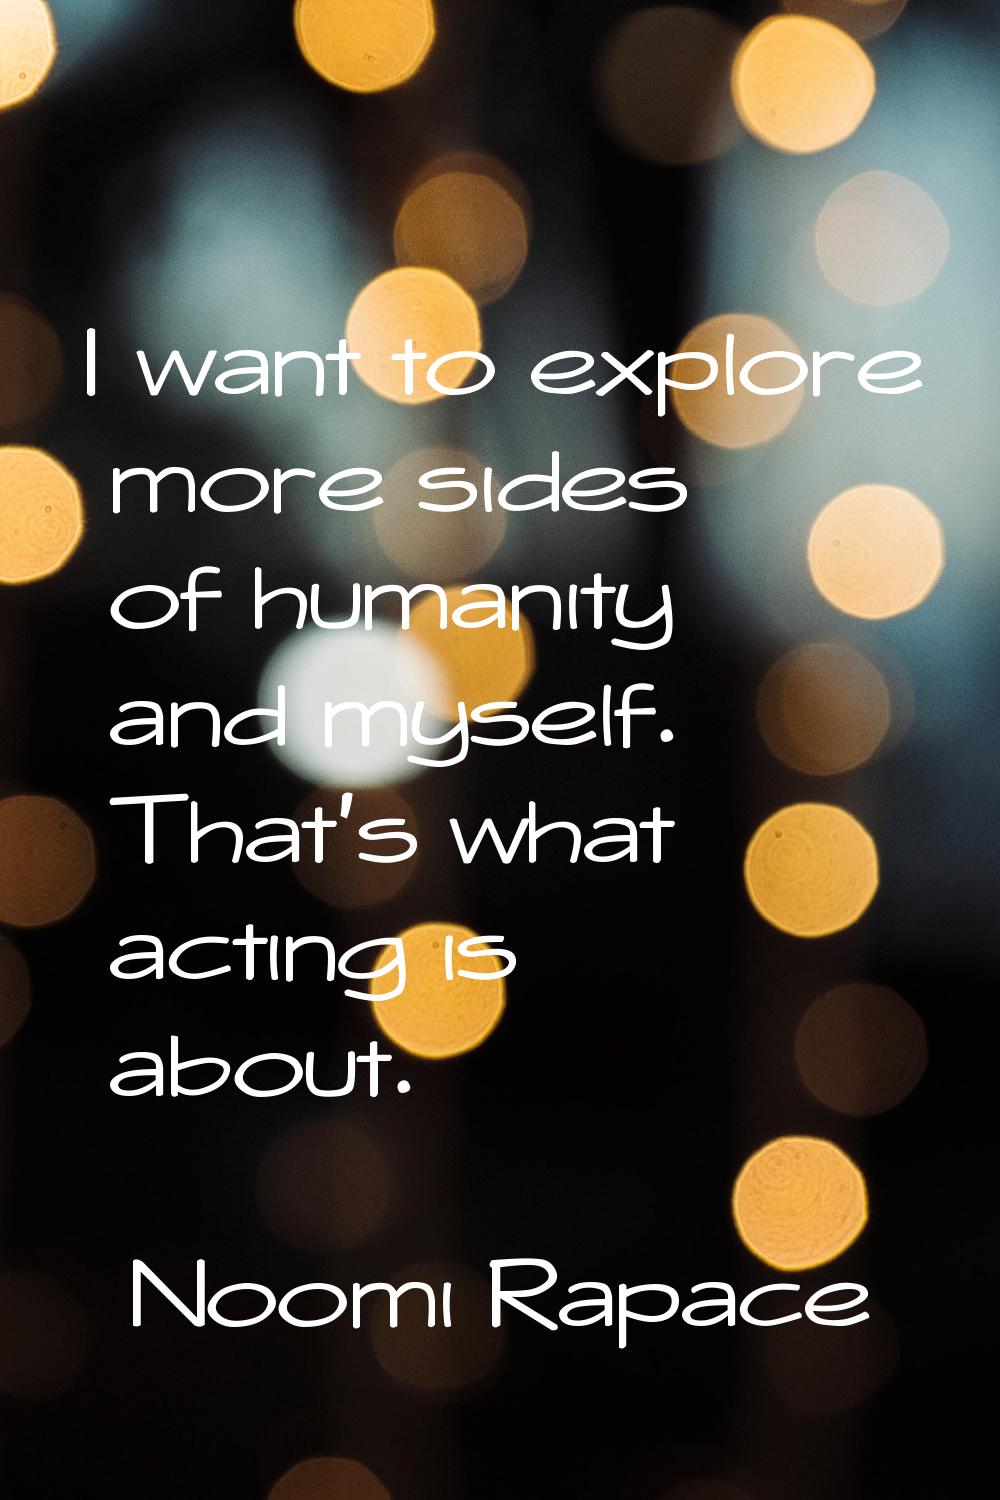 I want to explore more sides of humanity and myself. That's what acting is about.